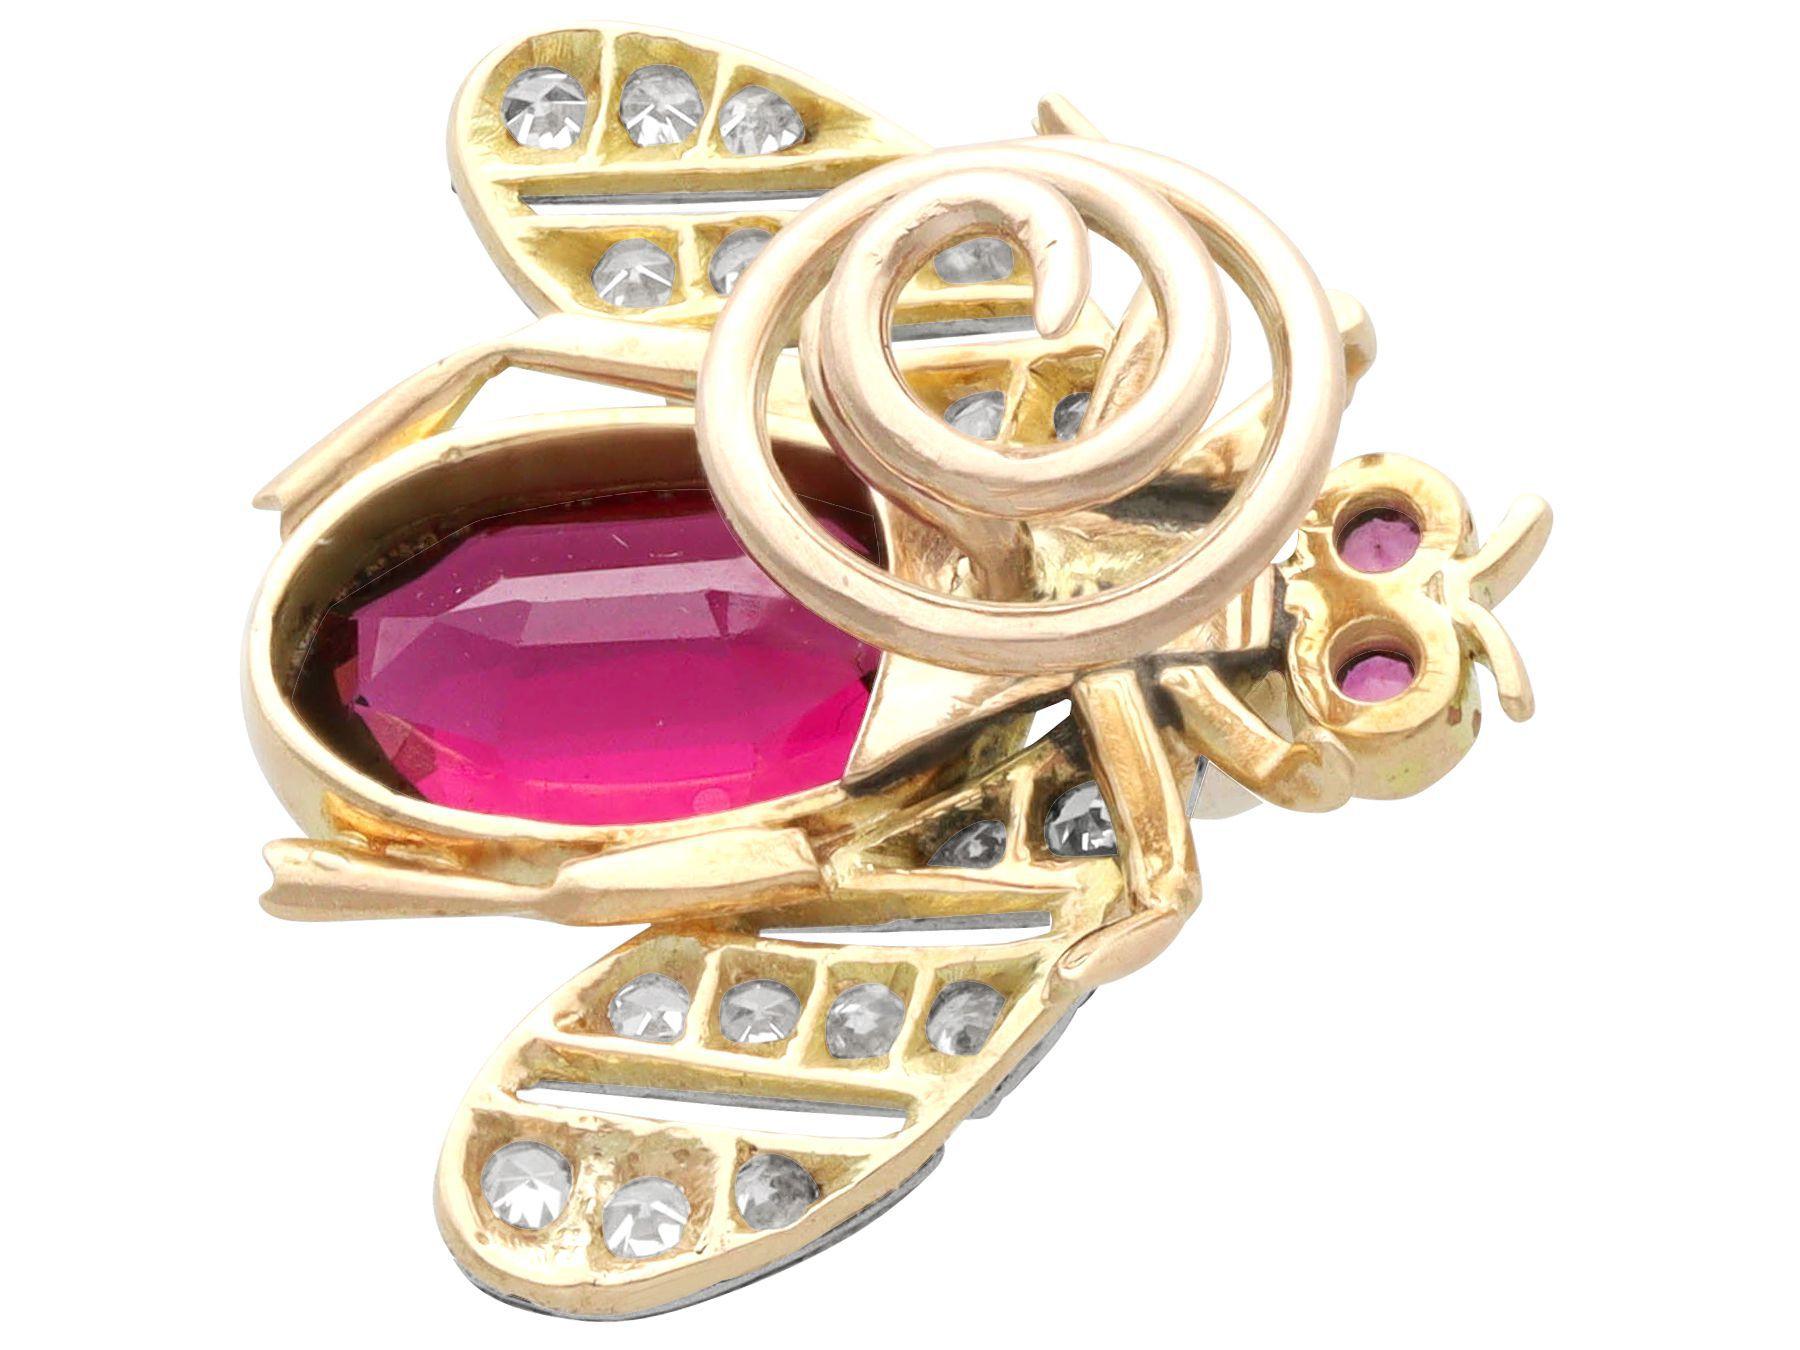 Antique 2.31ct Garnet, Diamond, Ruby and Pearl Gold Insect Buttonhole Brooch In Excellent Condition For Sale In Jesmond, Newcastle Upon Tyne